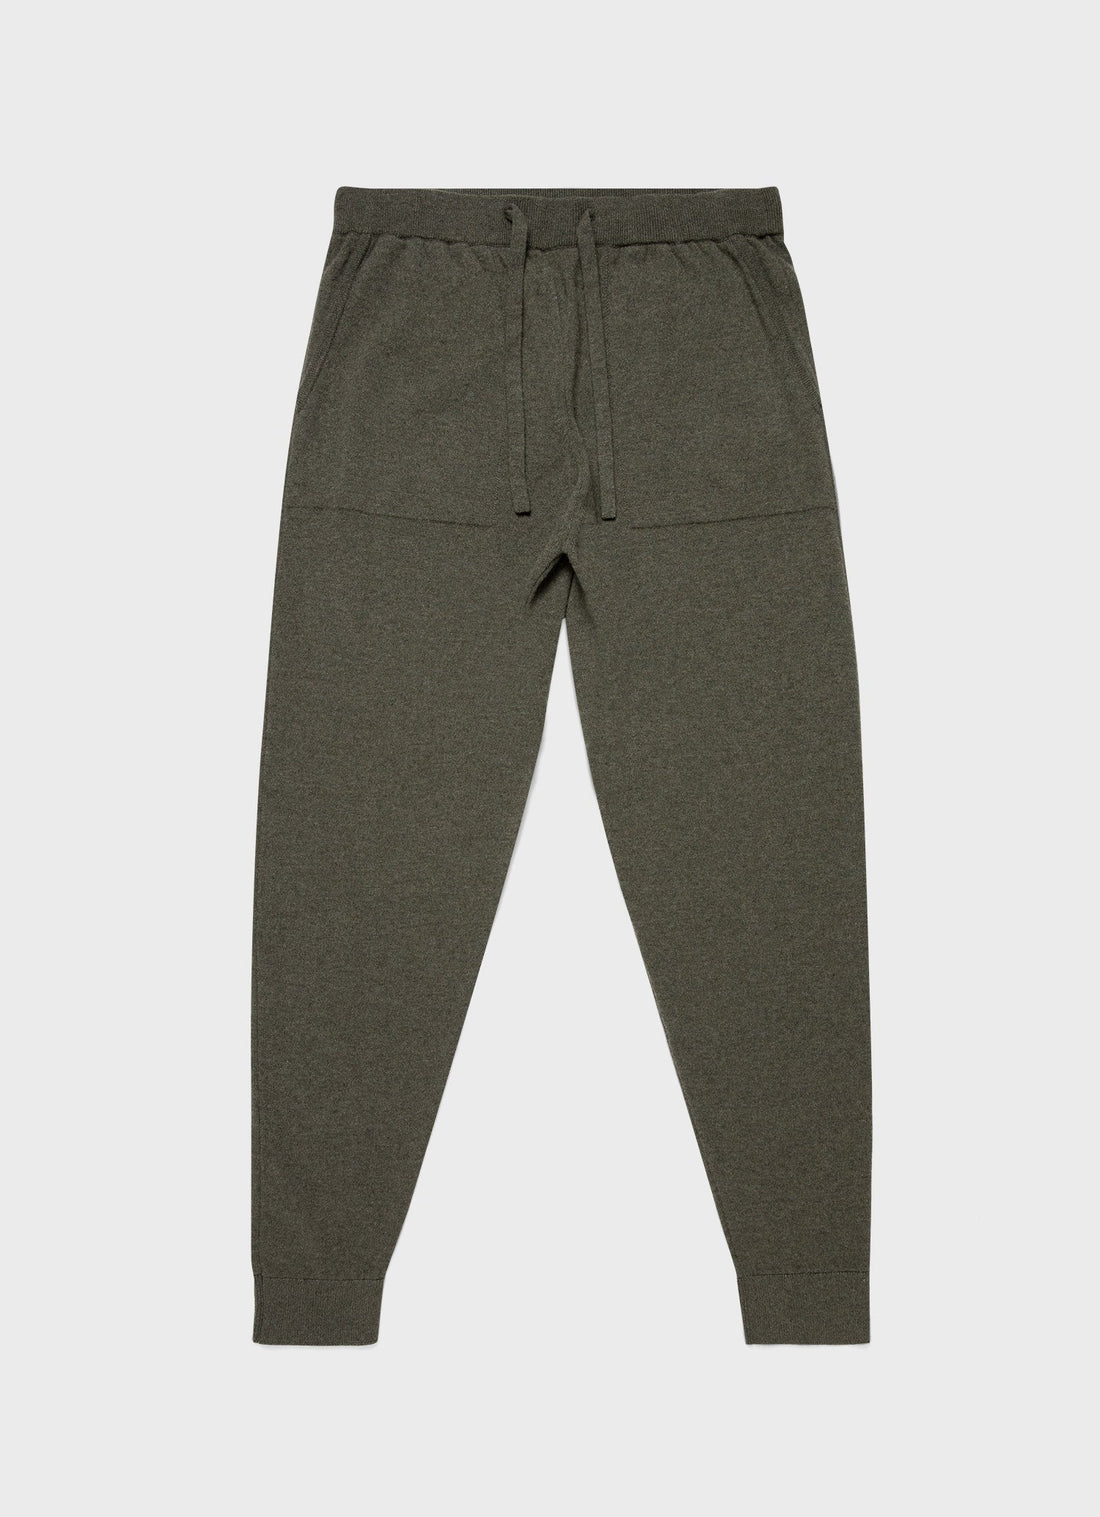 Men's Cashmere Lounge Pant in Dark Moss